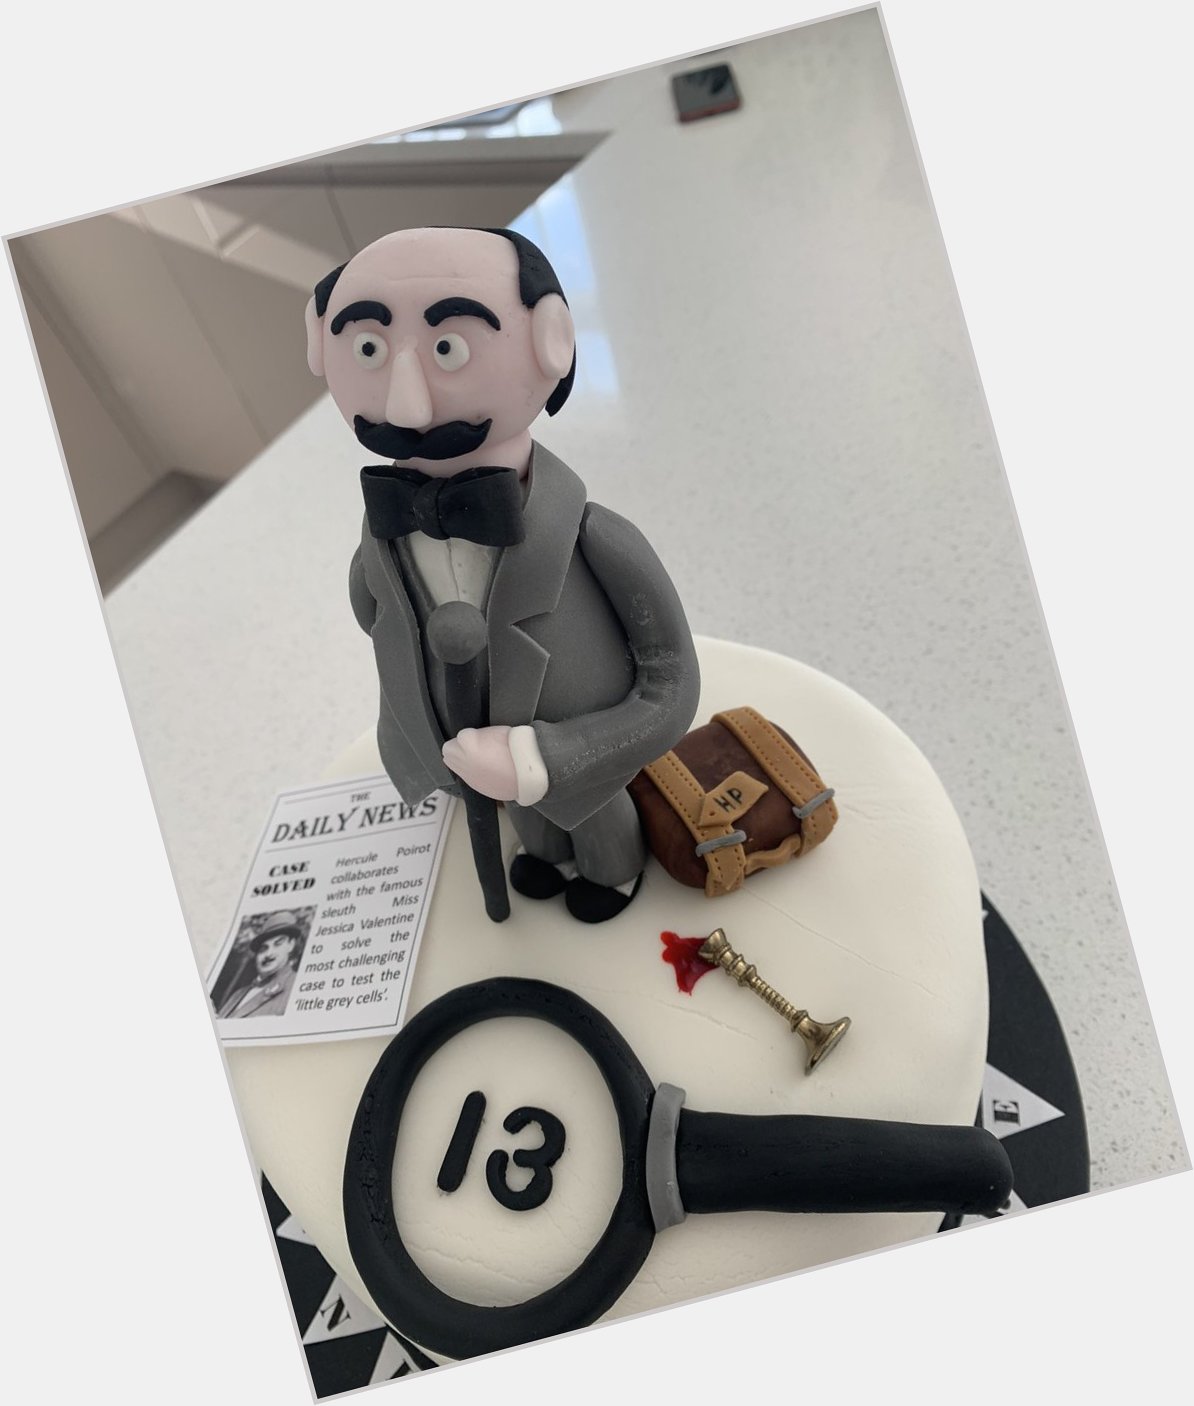  Happy birthday. My daughter wanted Poirot on her cake last week! Big fan. 